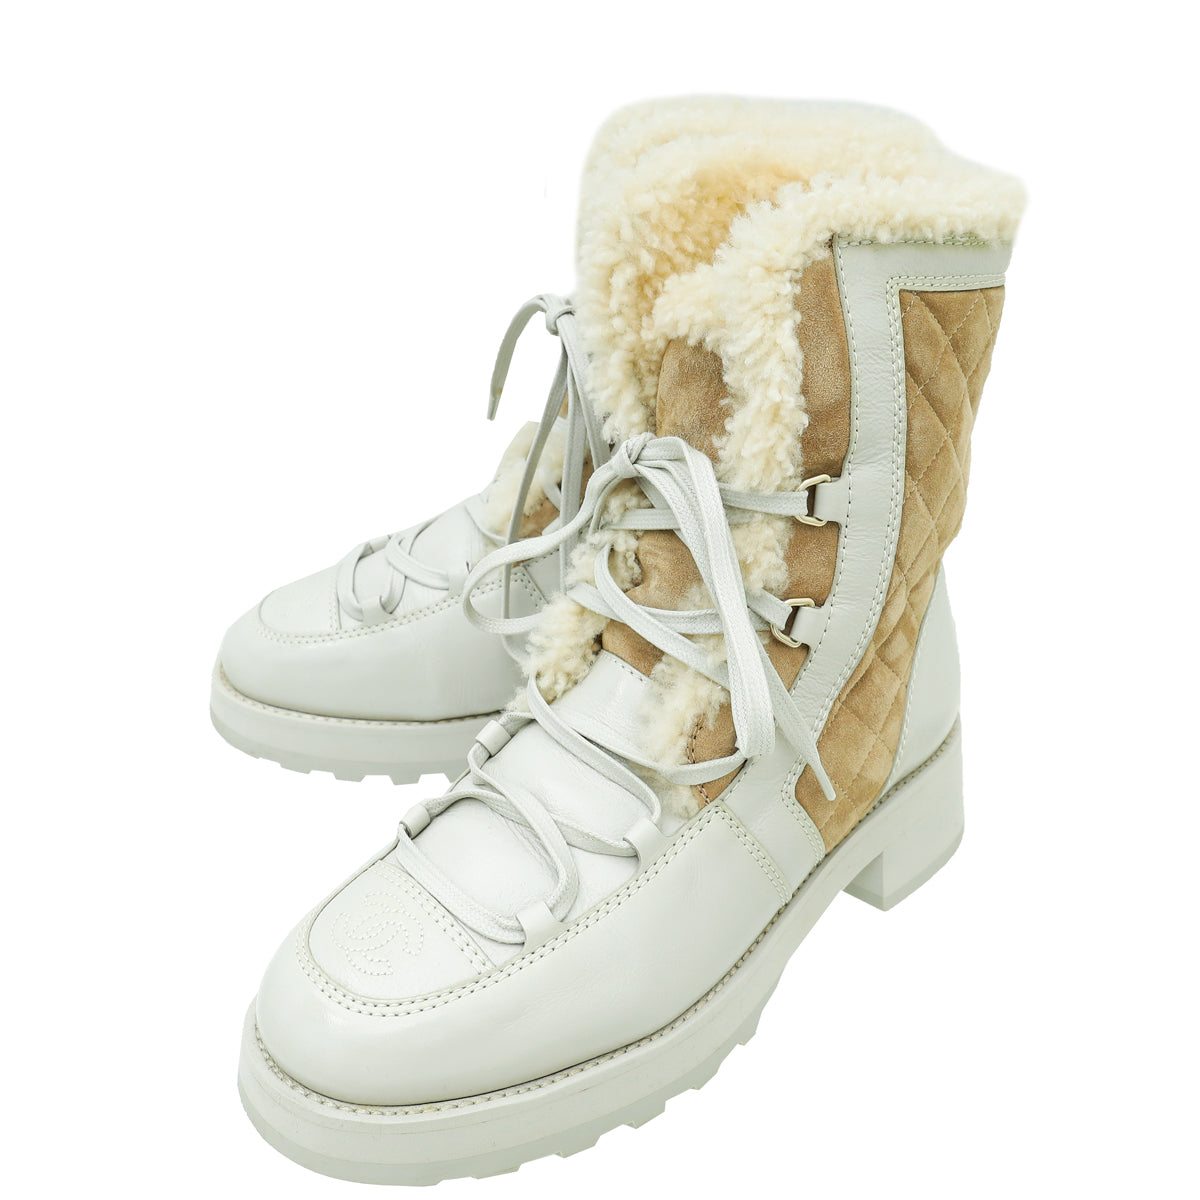 Chanel Bicolor CC Shearling Fur on Inside Lace Up Ankle Boot 39